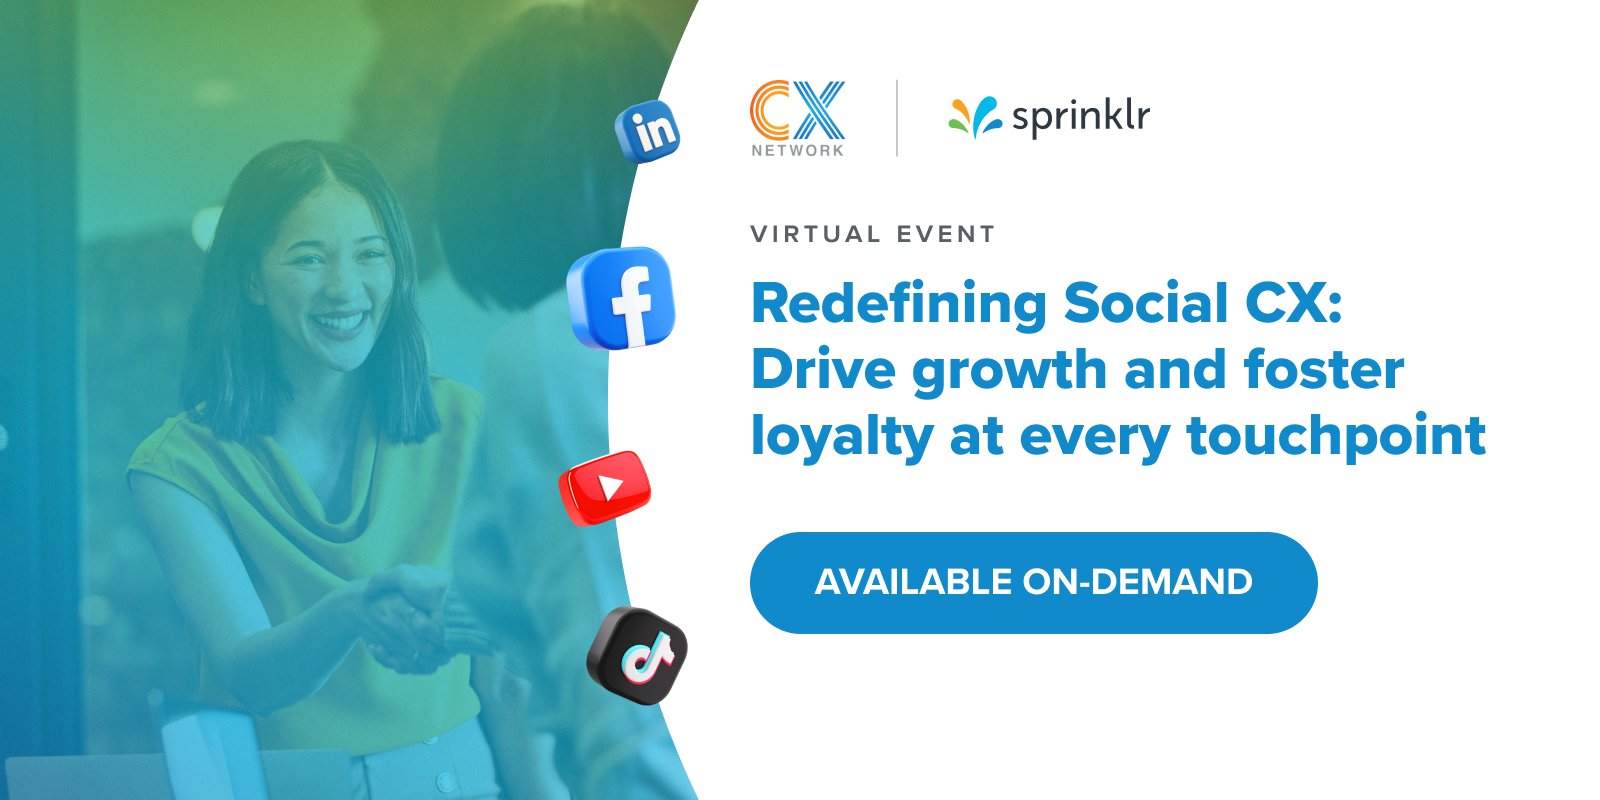 Redefining Social CX: Drive growth and foster loyalty at every touchpoint